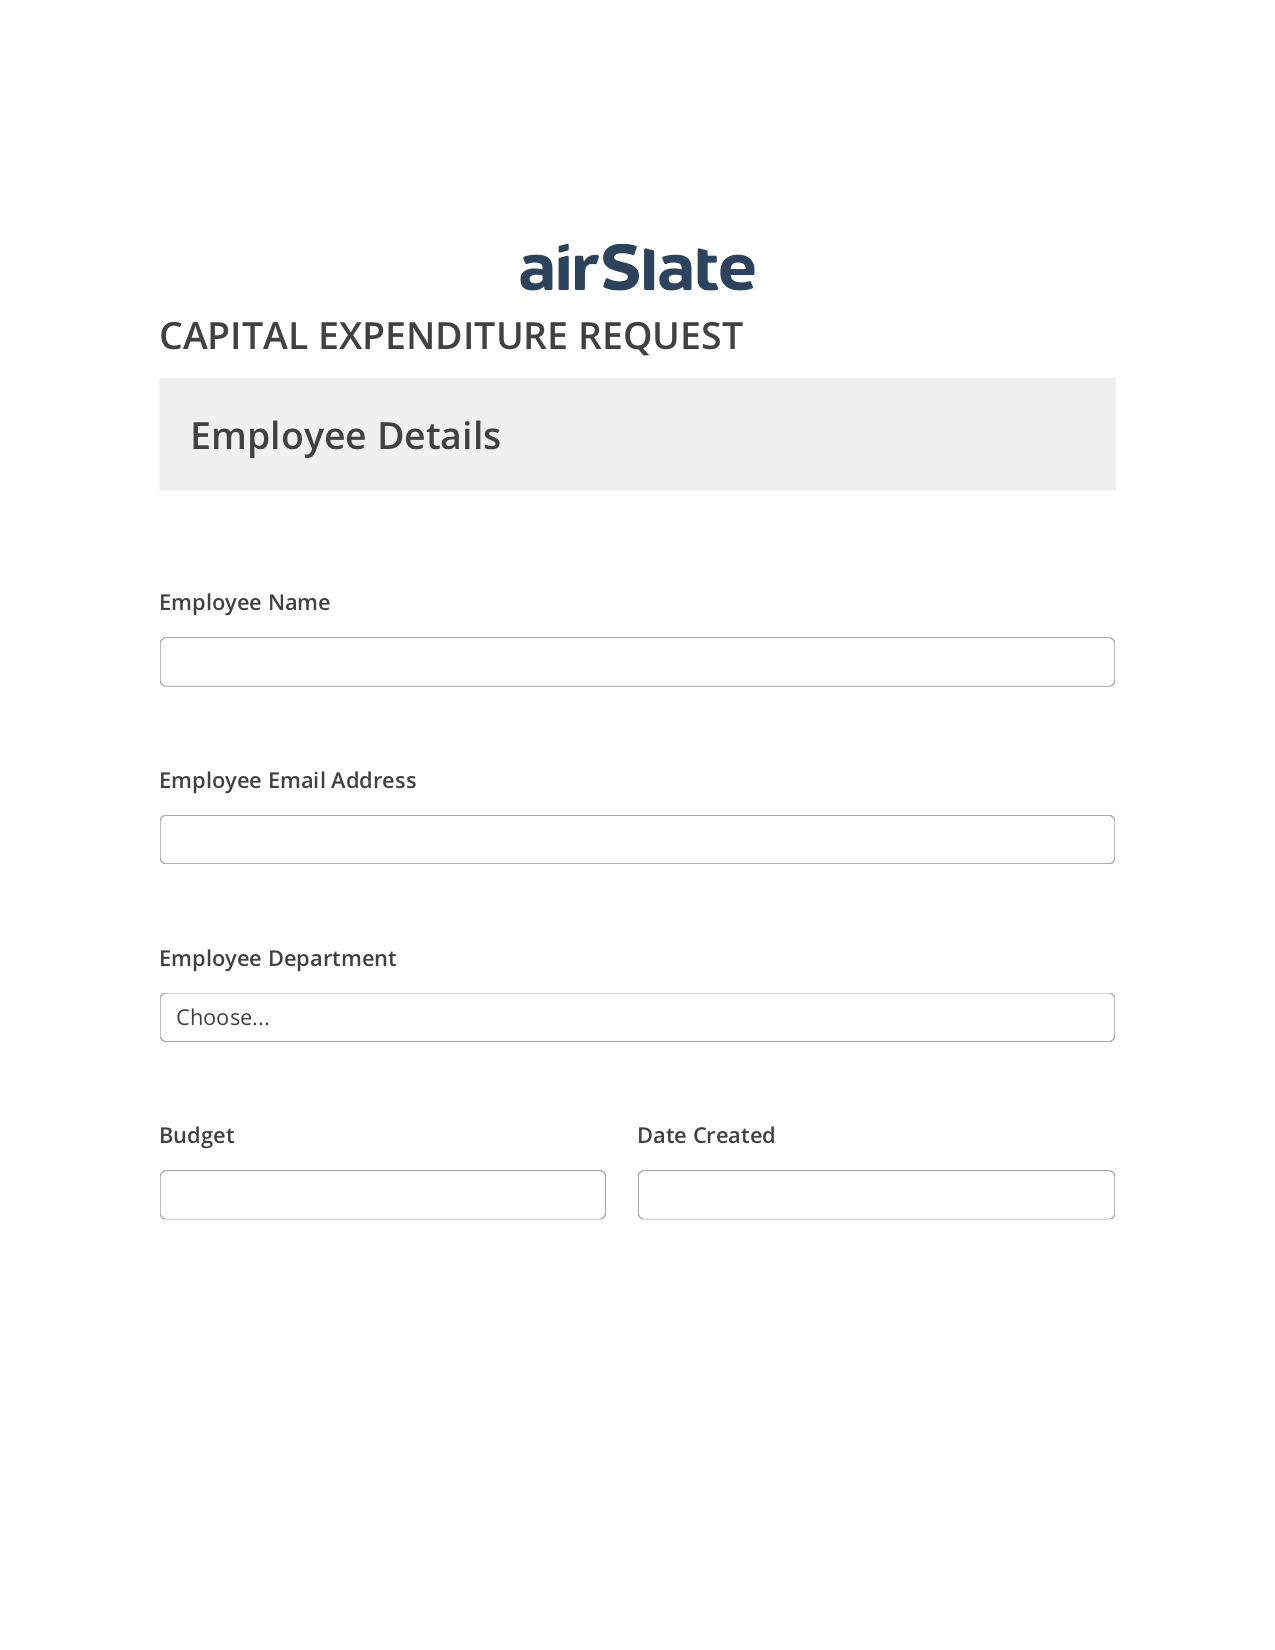 Capital Expenditure Request Approval Workflow Pre-fill from Salesforce Record Bot, Create Slate every Google Sheet Update Bot, Archive to Dropbox Bot